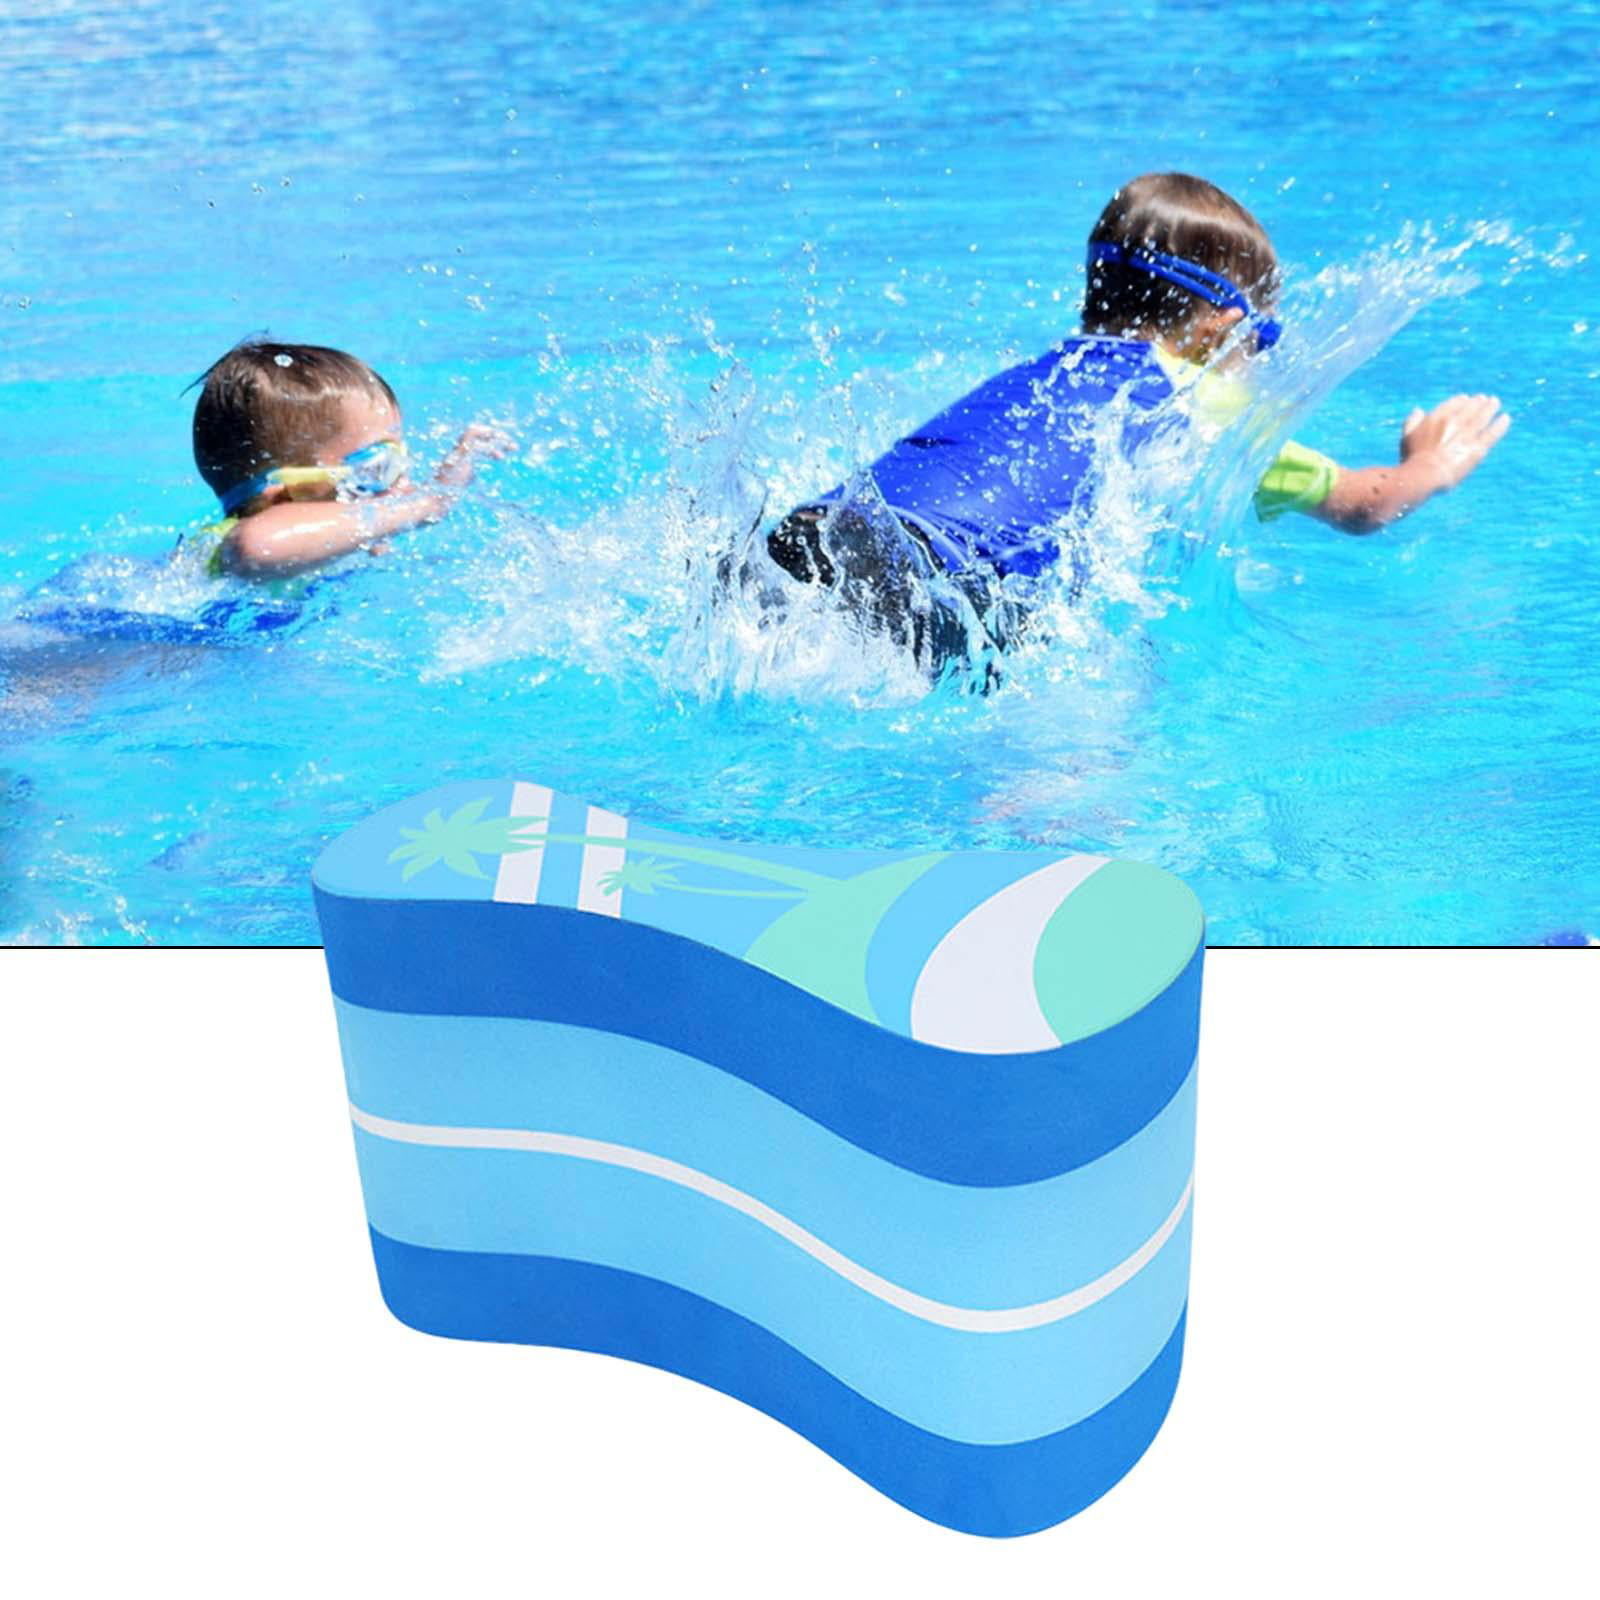 PANFIKH EVA Foam Swimming Floats for Kids - Safe and Durable Swim Training  Aid | Swimming Floats for Small Champions (Large)